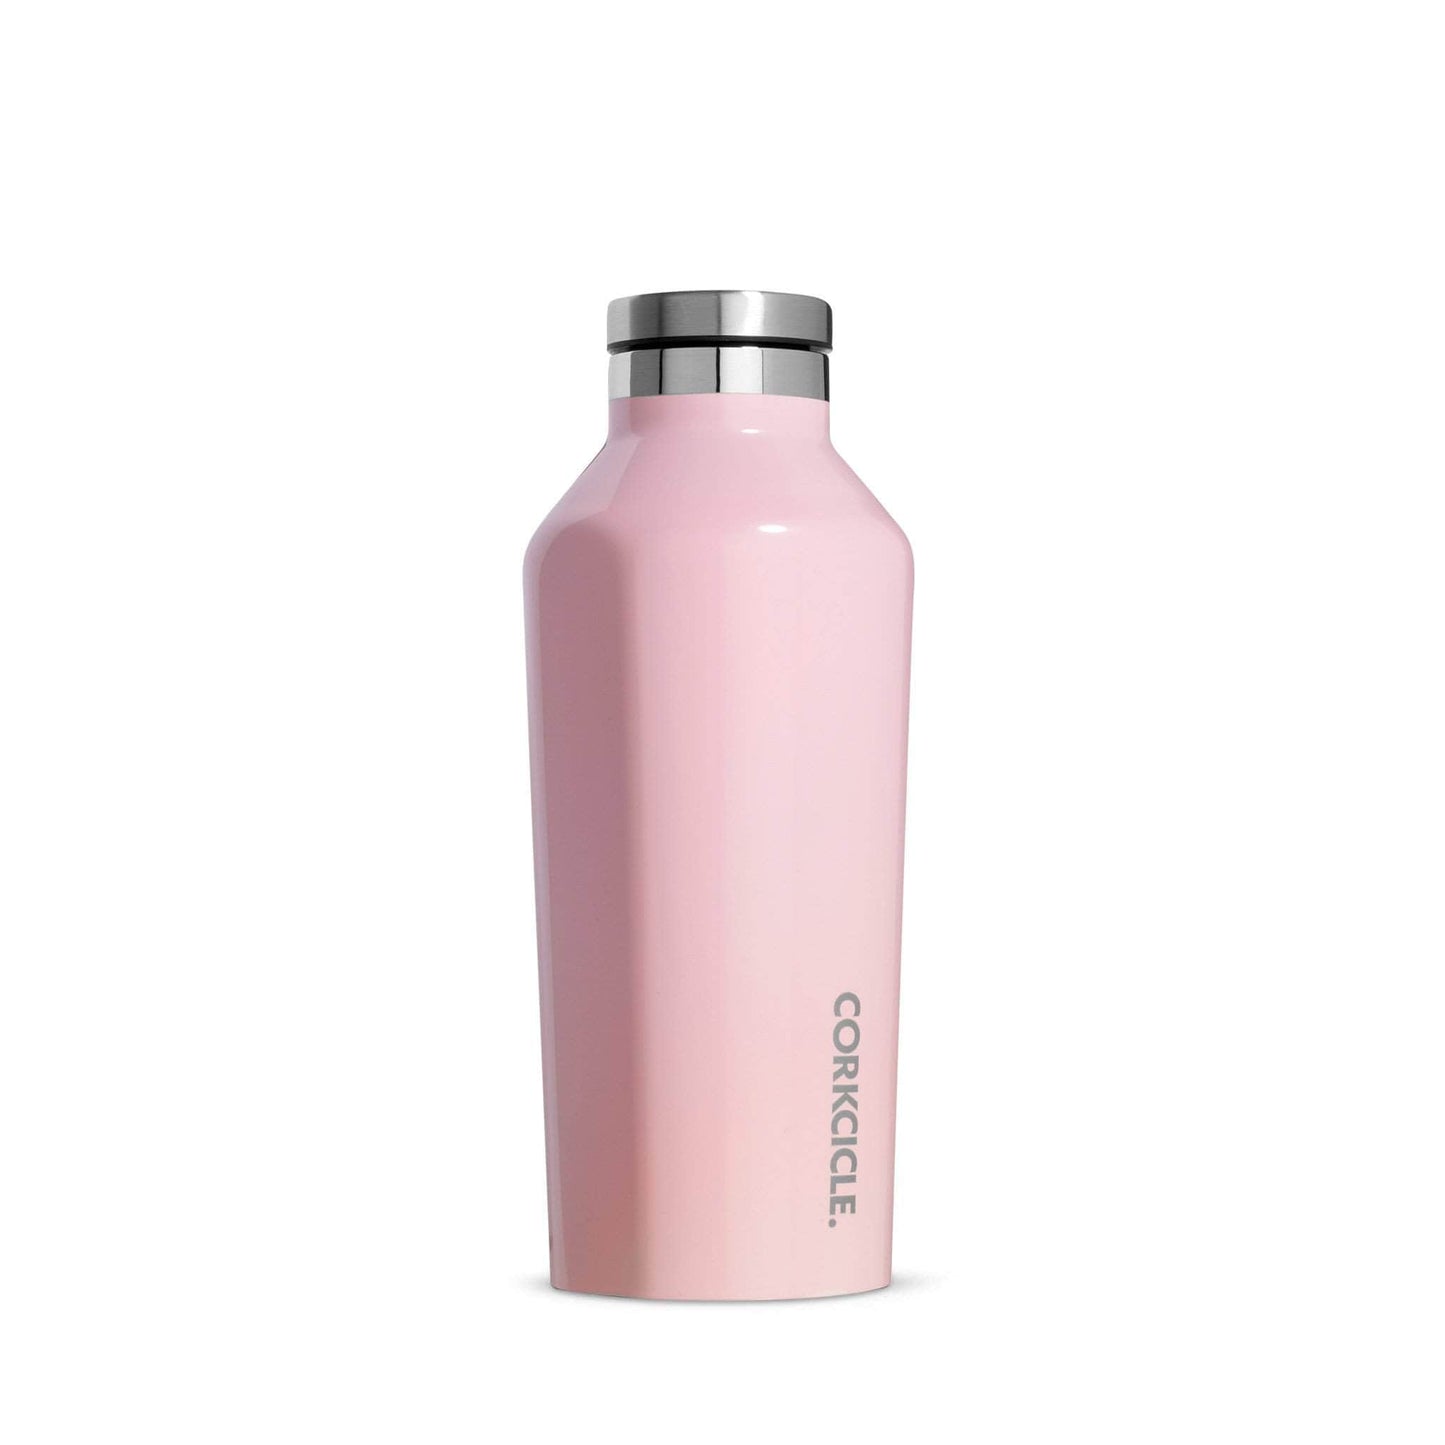 Corkcicle Water Bottles 9oz/270ml Corkcicle Canteen - Insulated Bottle - Gloss Rose Quartz